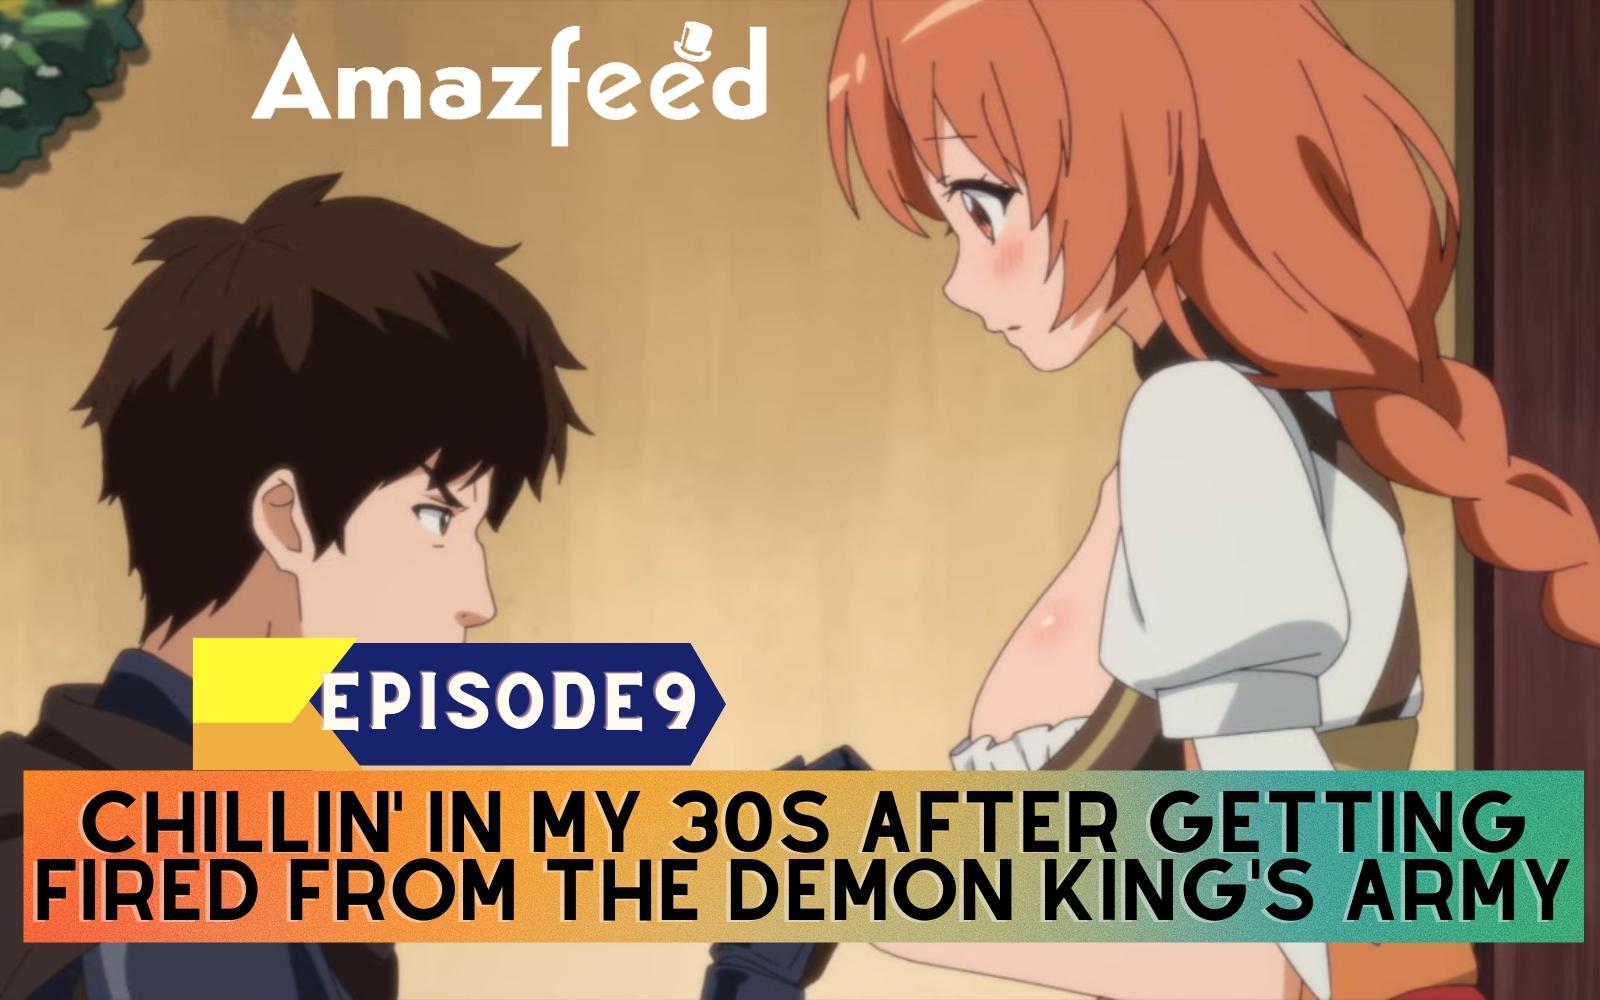 Watch Chillin' in My 30s after Getting Fired from the Demon King's Army  season 1 episode 9 streaming online